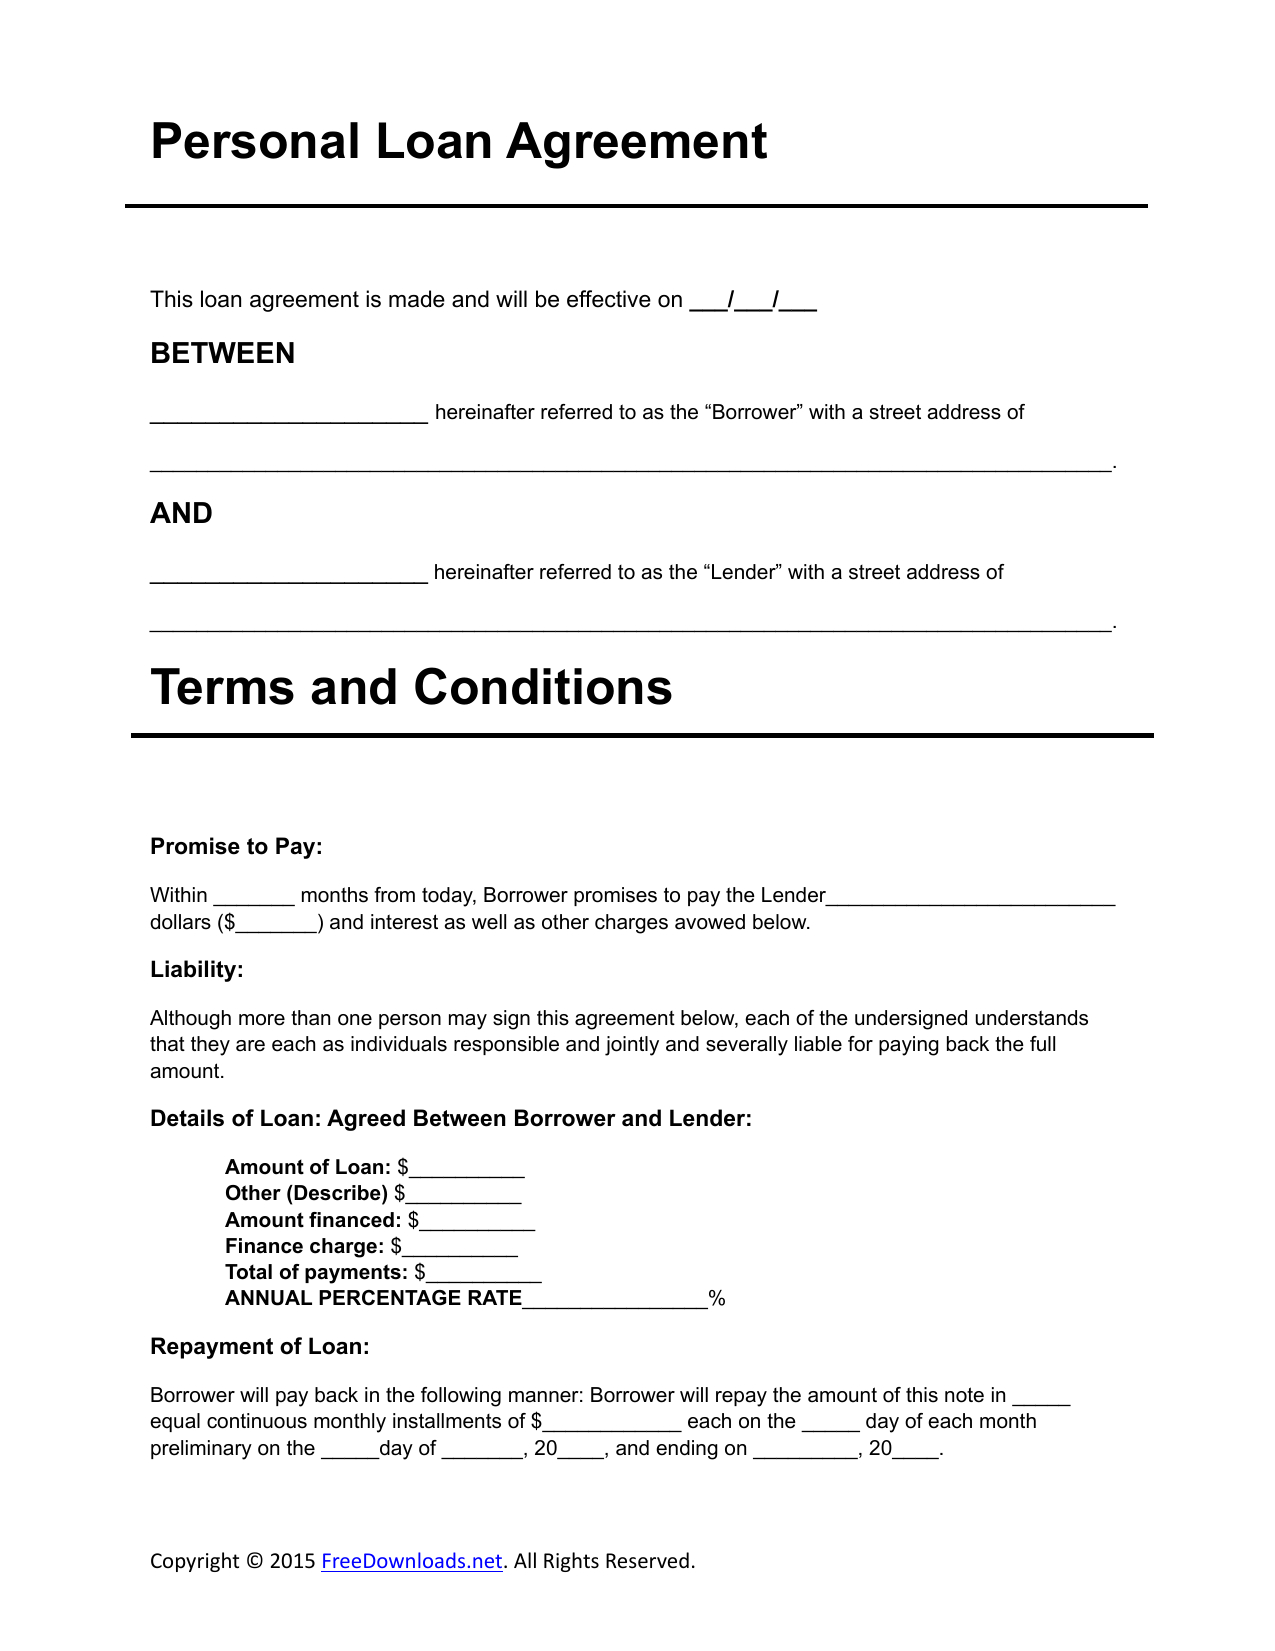 Personal Loan Agreement Letter Download Personal Loan Agreement Template Pdf Rtf Word